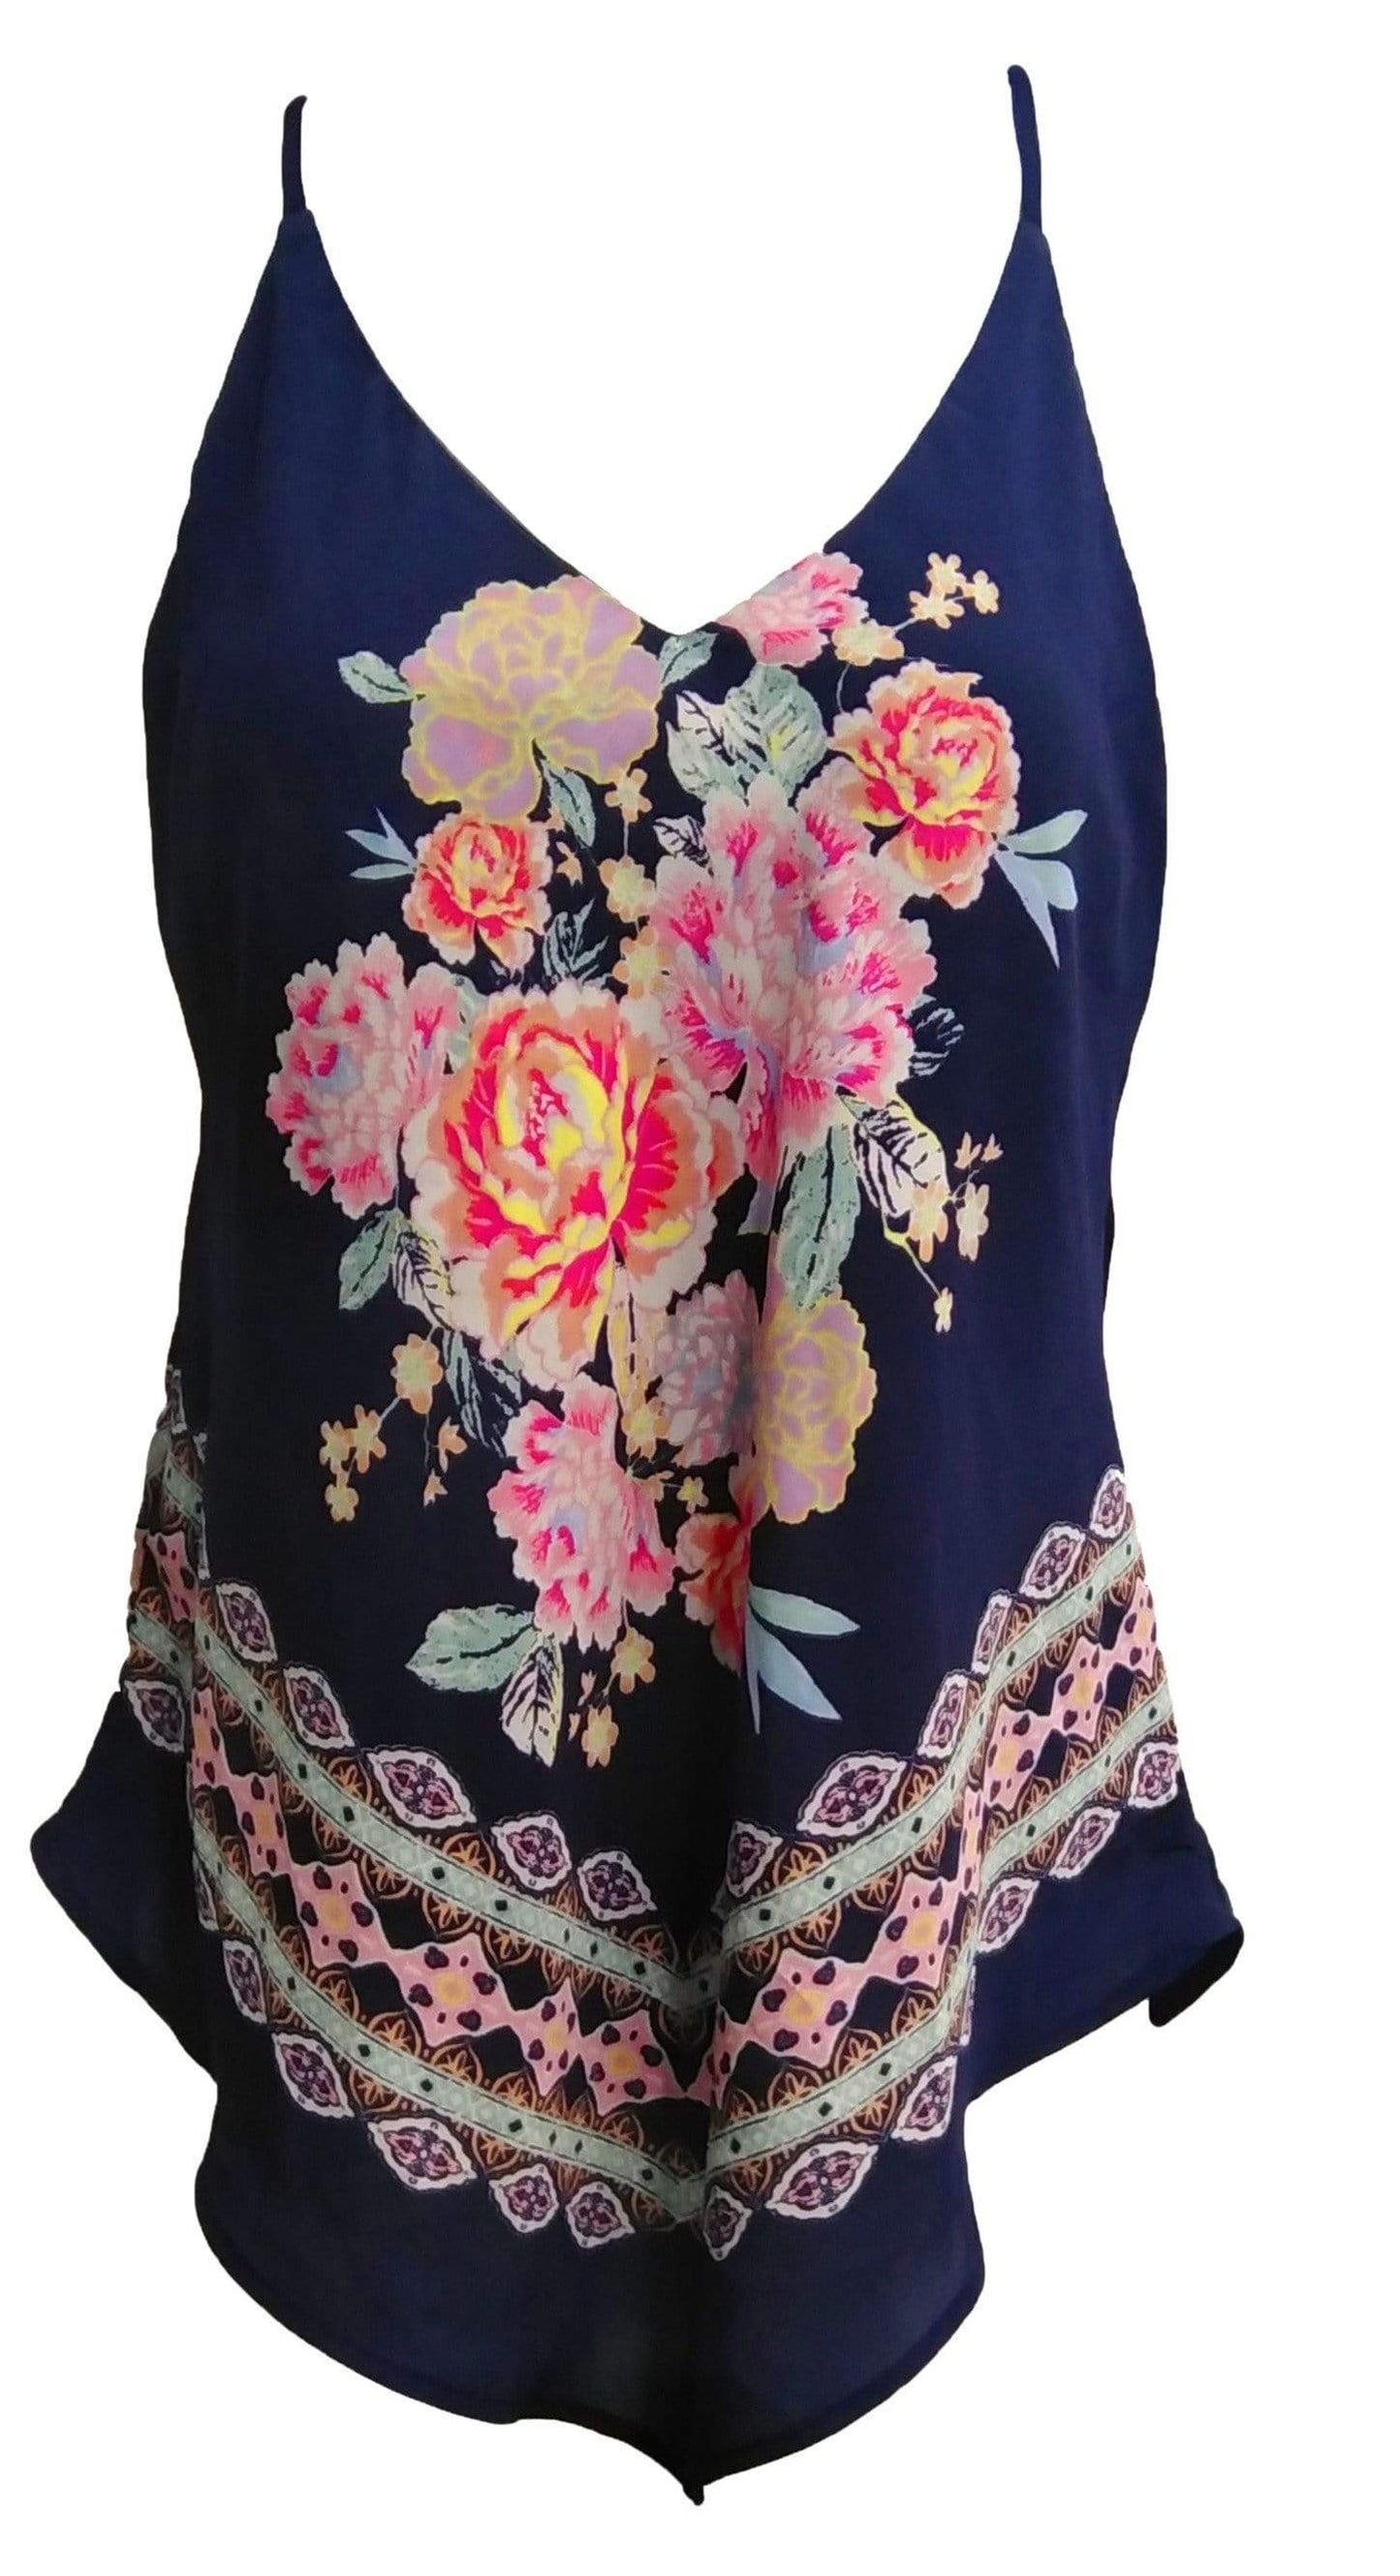 by&by Womens Tops Medium / Navy Multi-Color Floral V-Neck Sleeveless Top